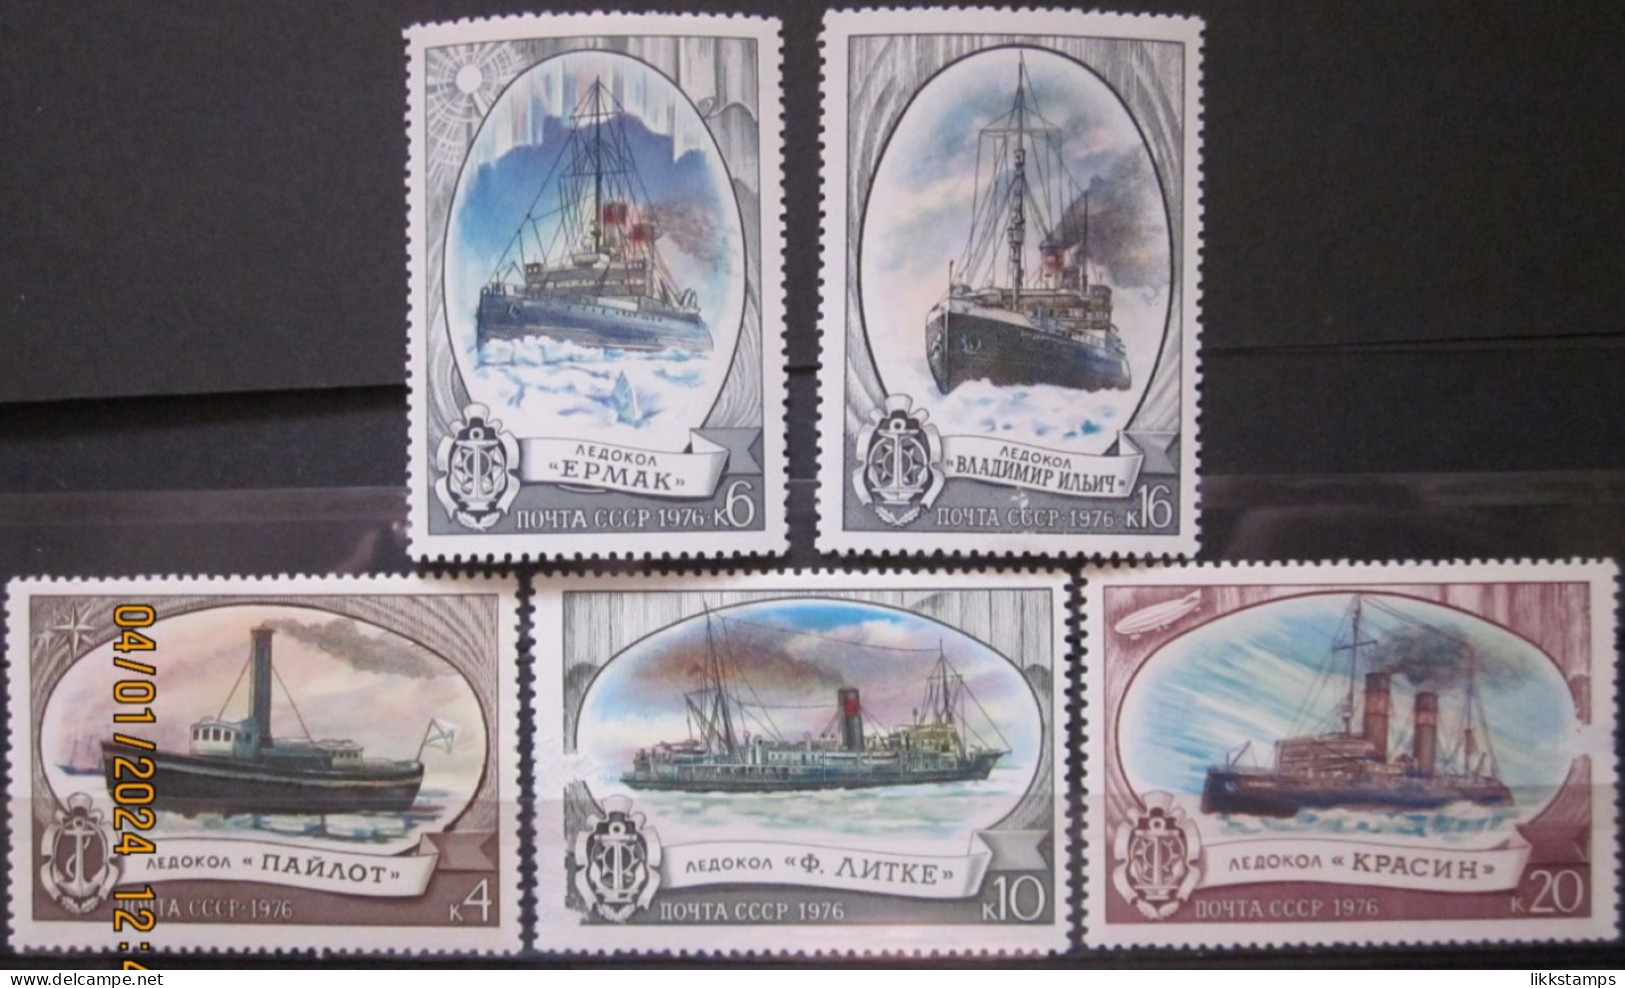 RUSSIA ~ 1976 ~ S.G. NUMBERS 4598 - 4602. ~ ICEBREAKERS. ~ MNH #03585 - Neufs